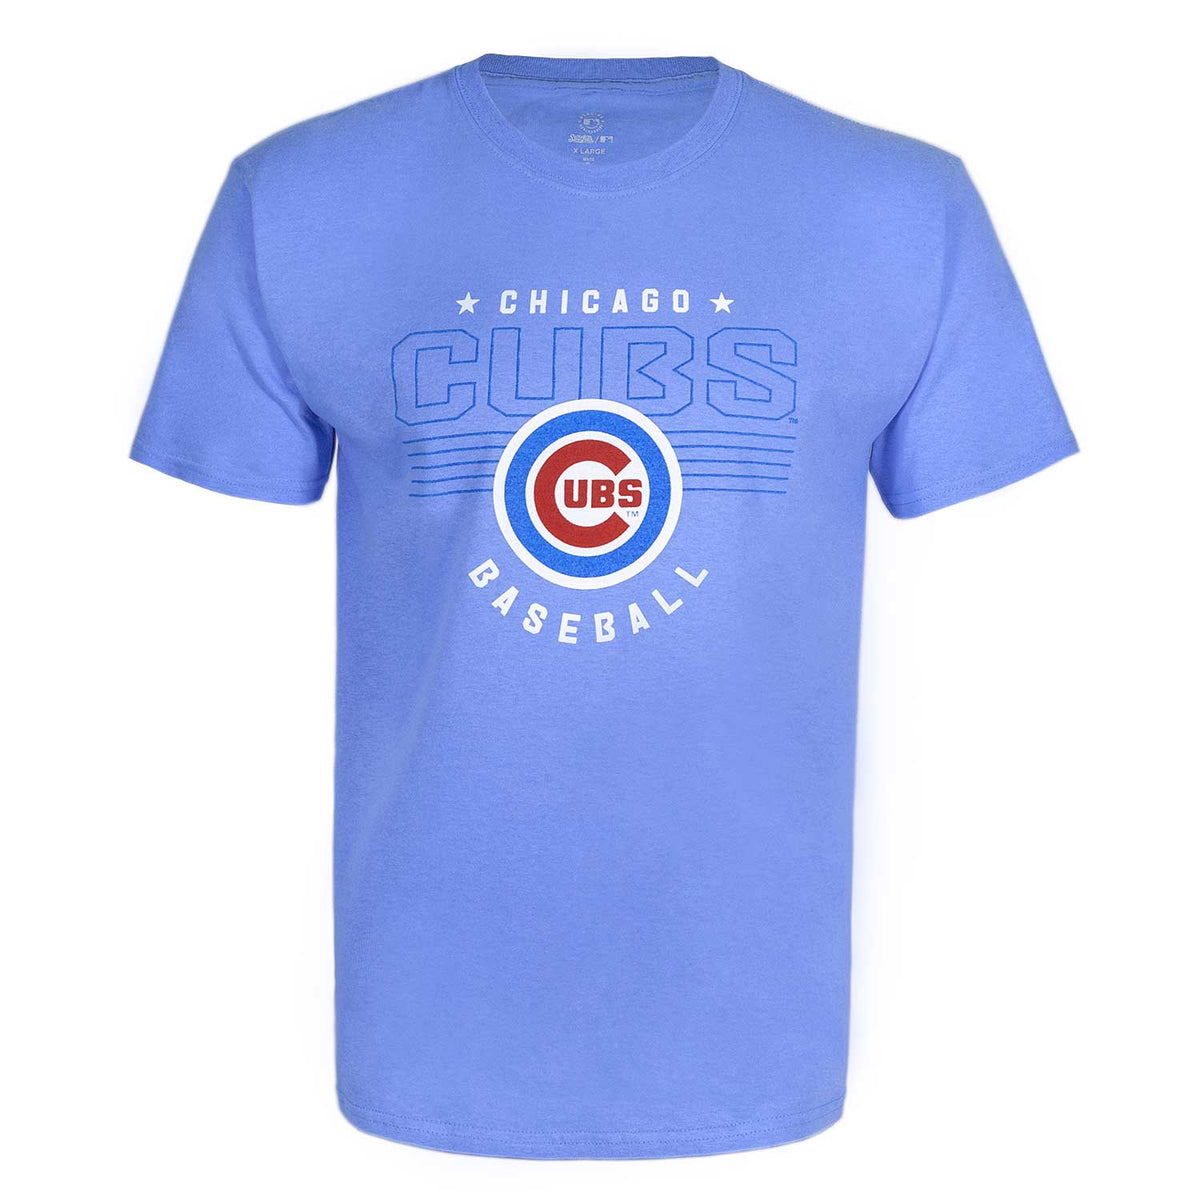 Chicago Cubs Youth Vintage Classic Grey T-Shirt X-Large = 18-20